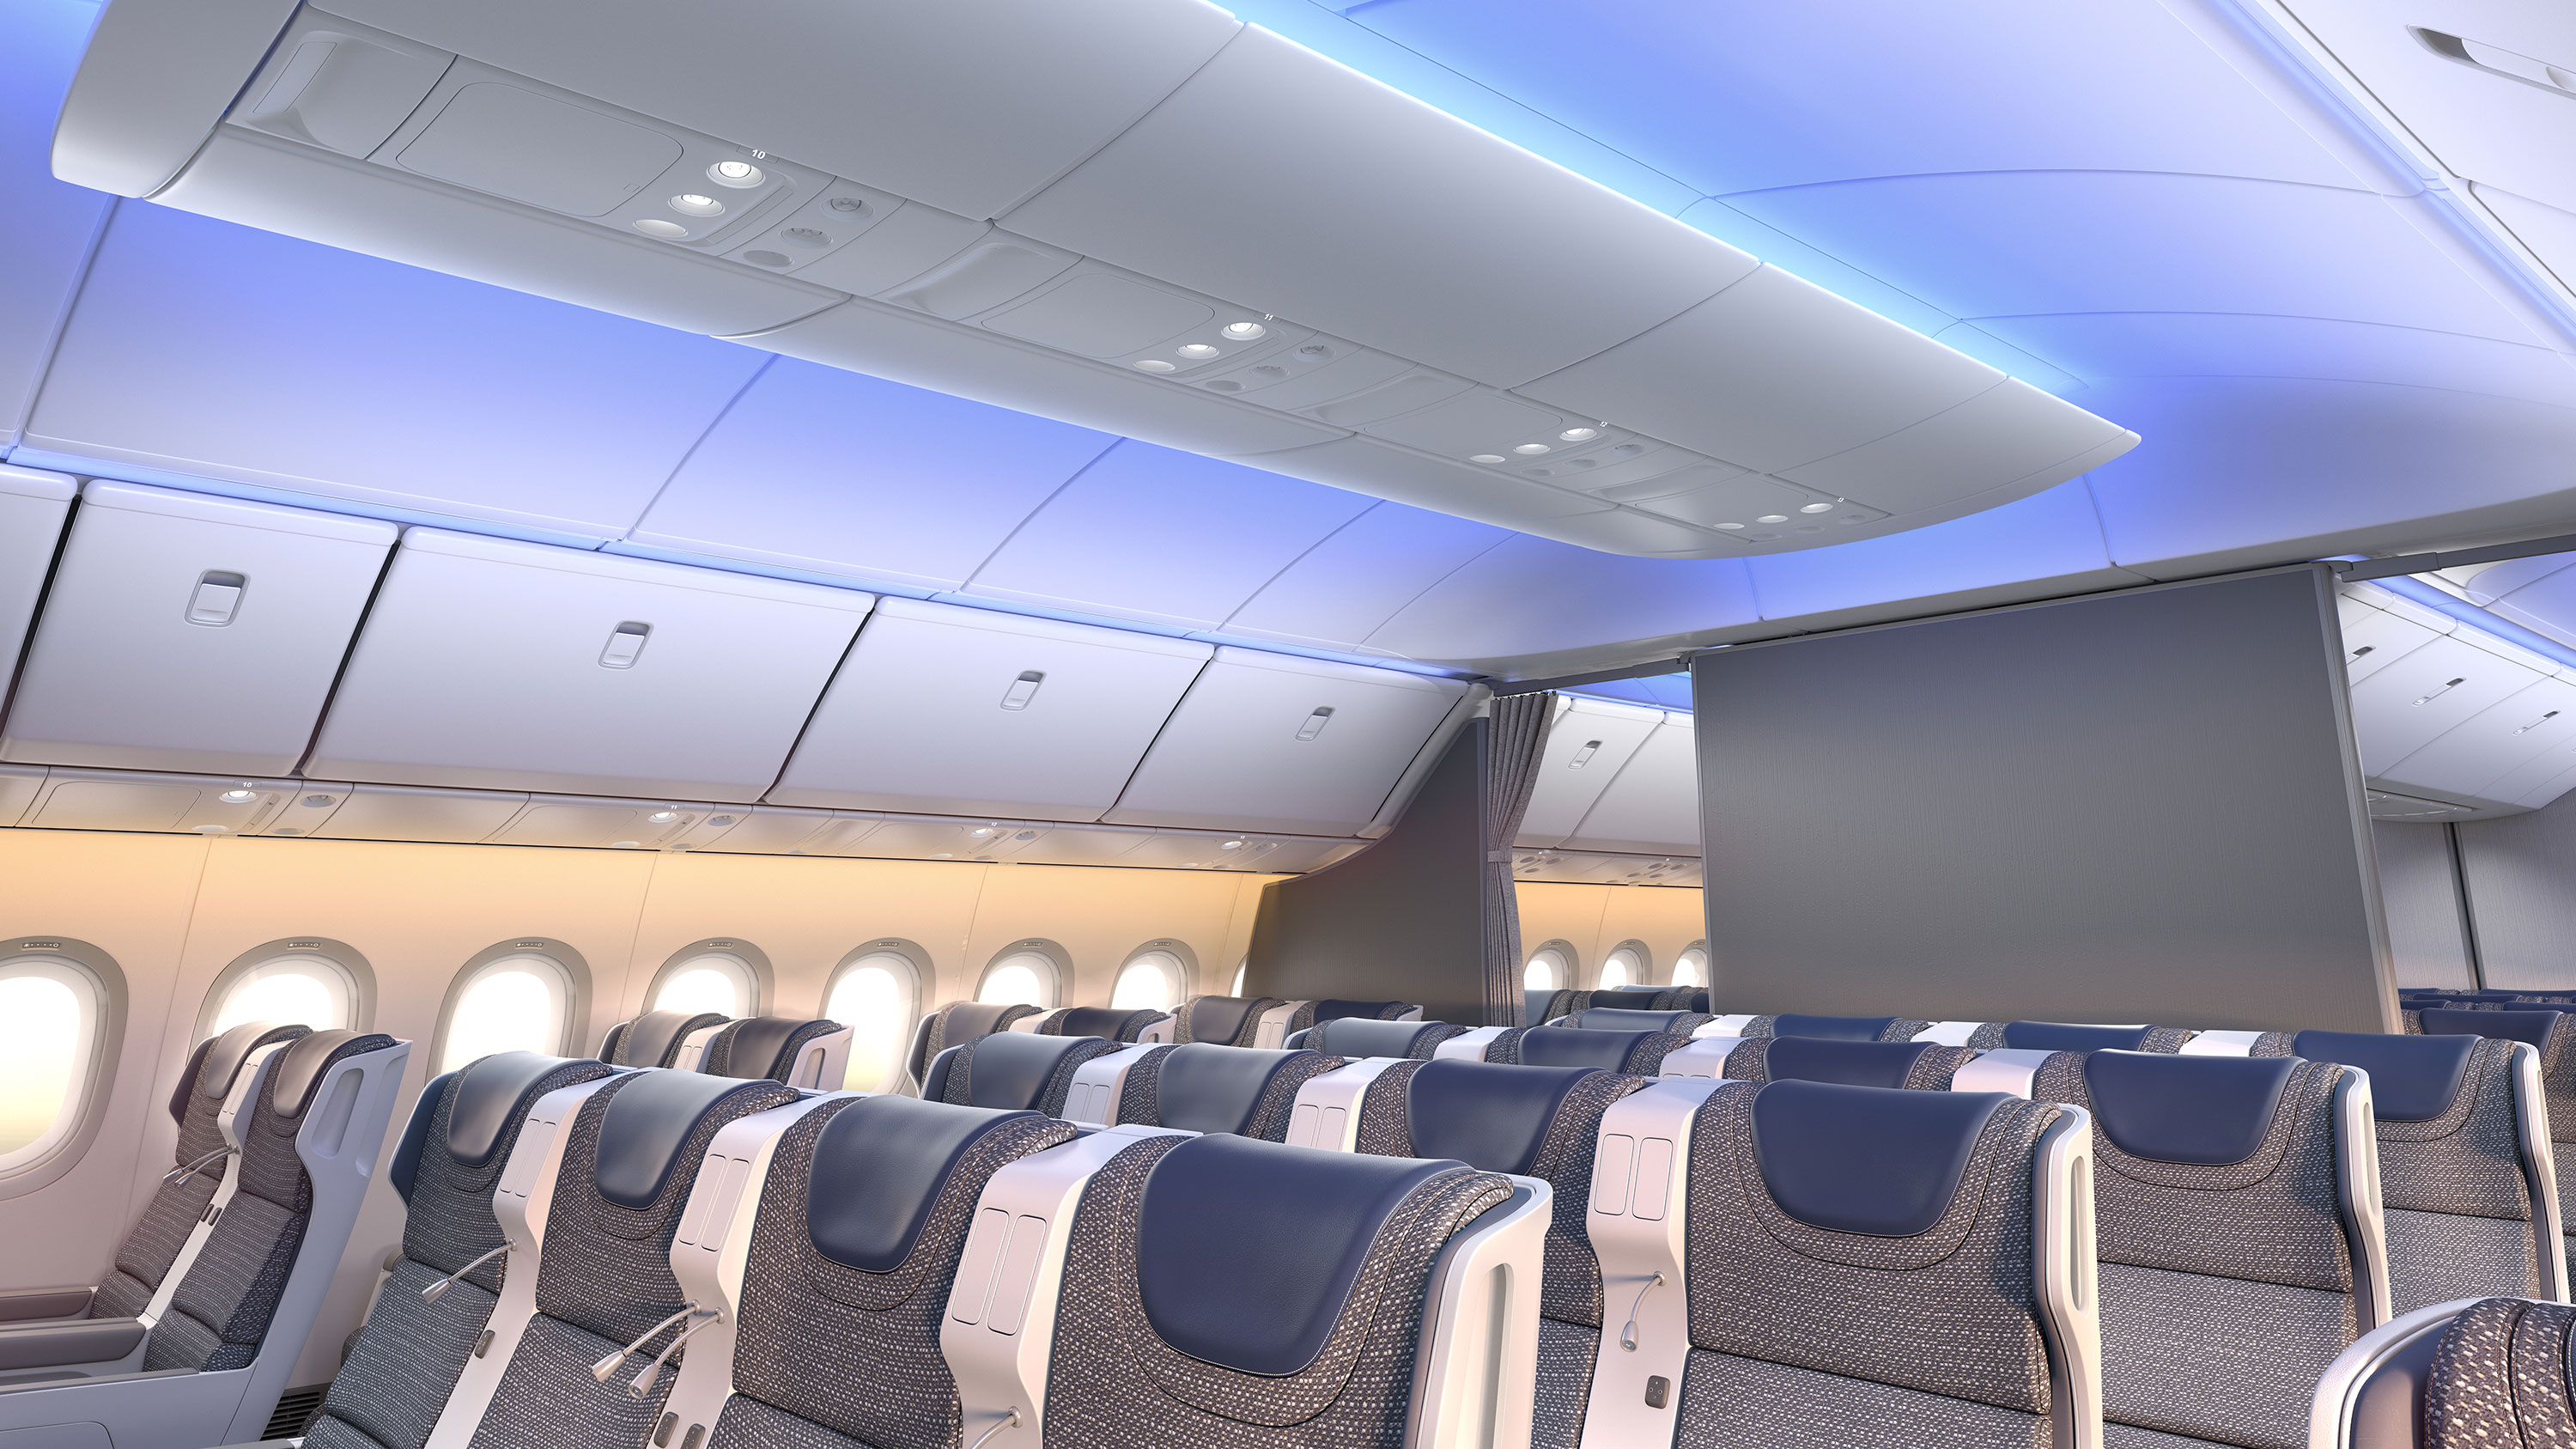 Photos Show What Interior Of New Boeing 777x Might Look Like